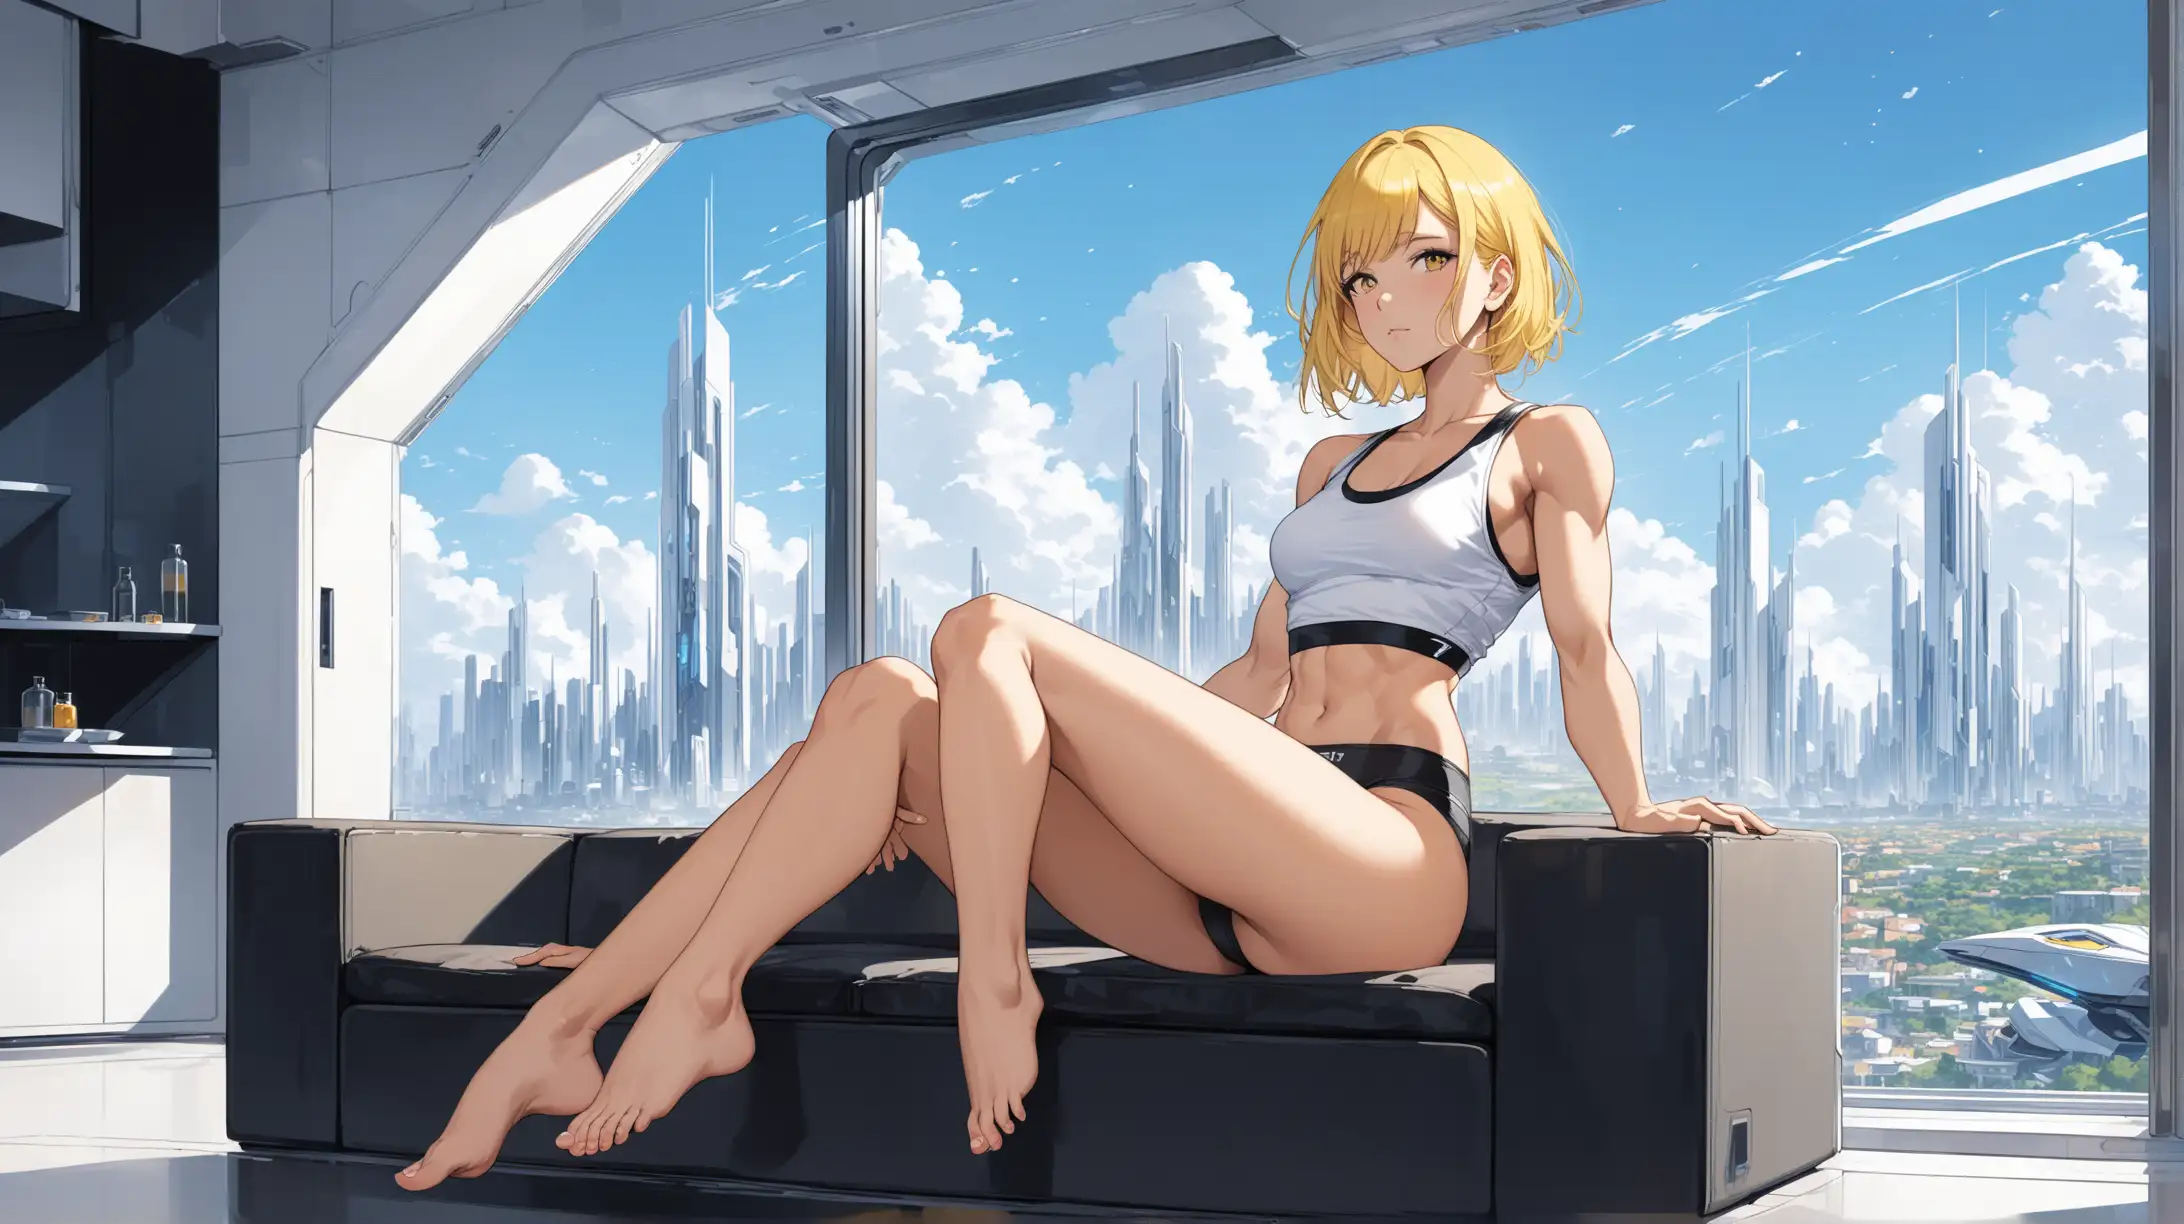 sexy fit 24 year old hero girl, short chin length yellow hair, sitting on edge of couch in futuristic apartment, wearing short white tank top, sexy muscular midriff, black panties, barefoot, blue sky and futuristic town in background through window,  yellow black white 3 color minimal design